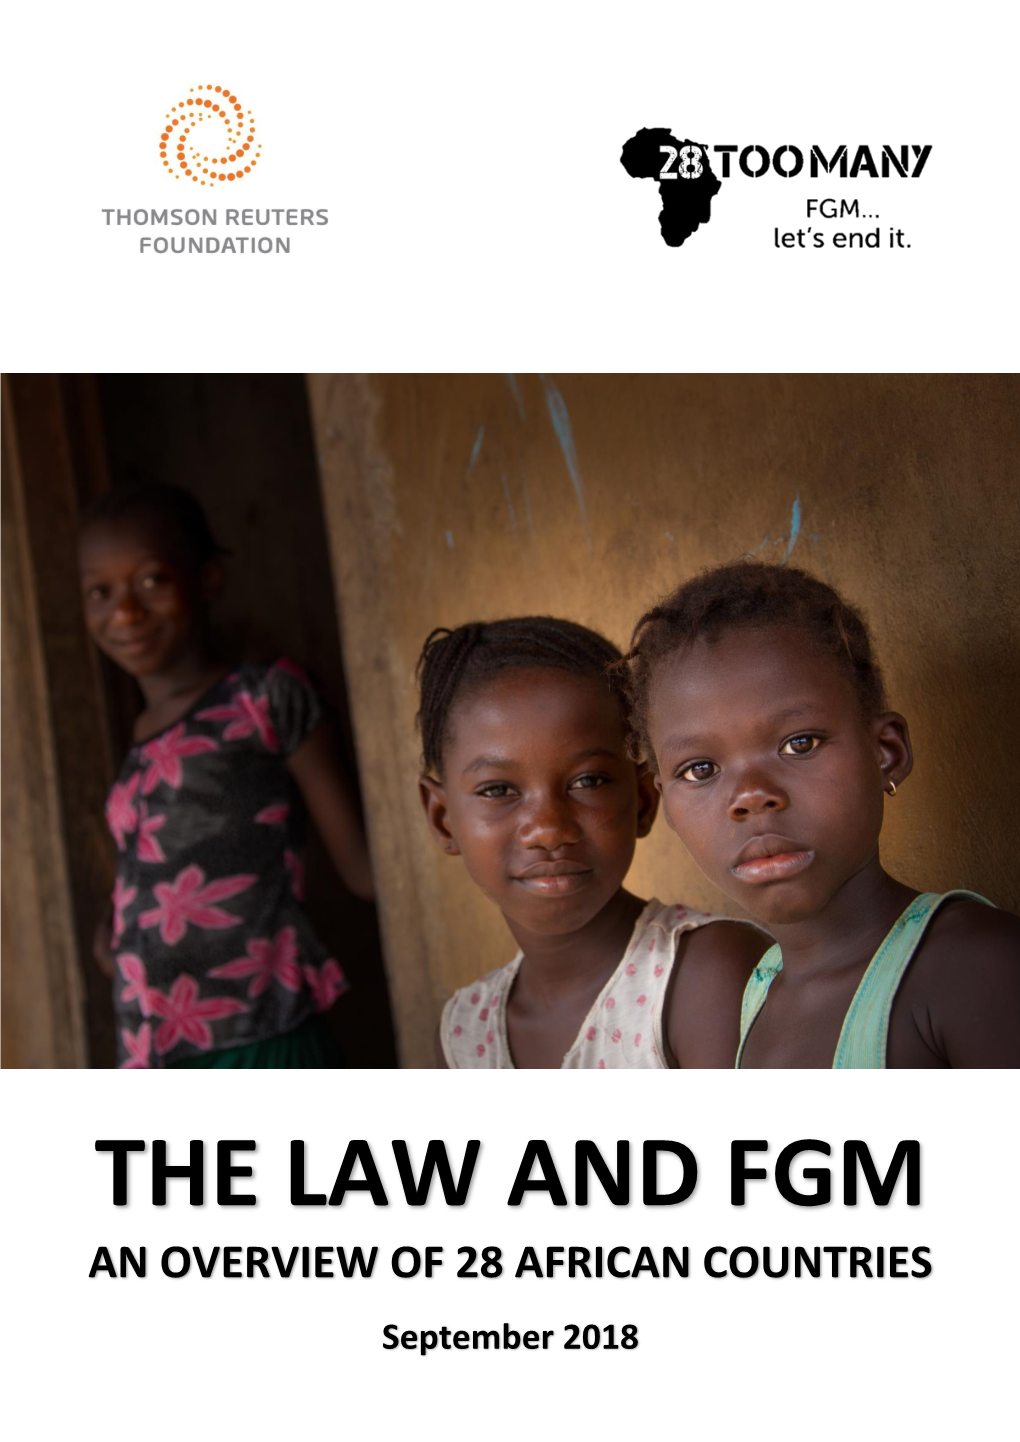 The Law and FGM: an Overview of 28 African Countries (September 2018)